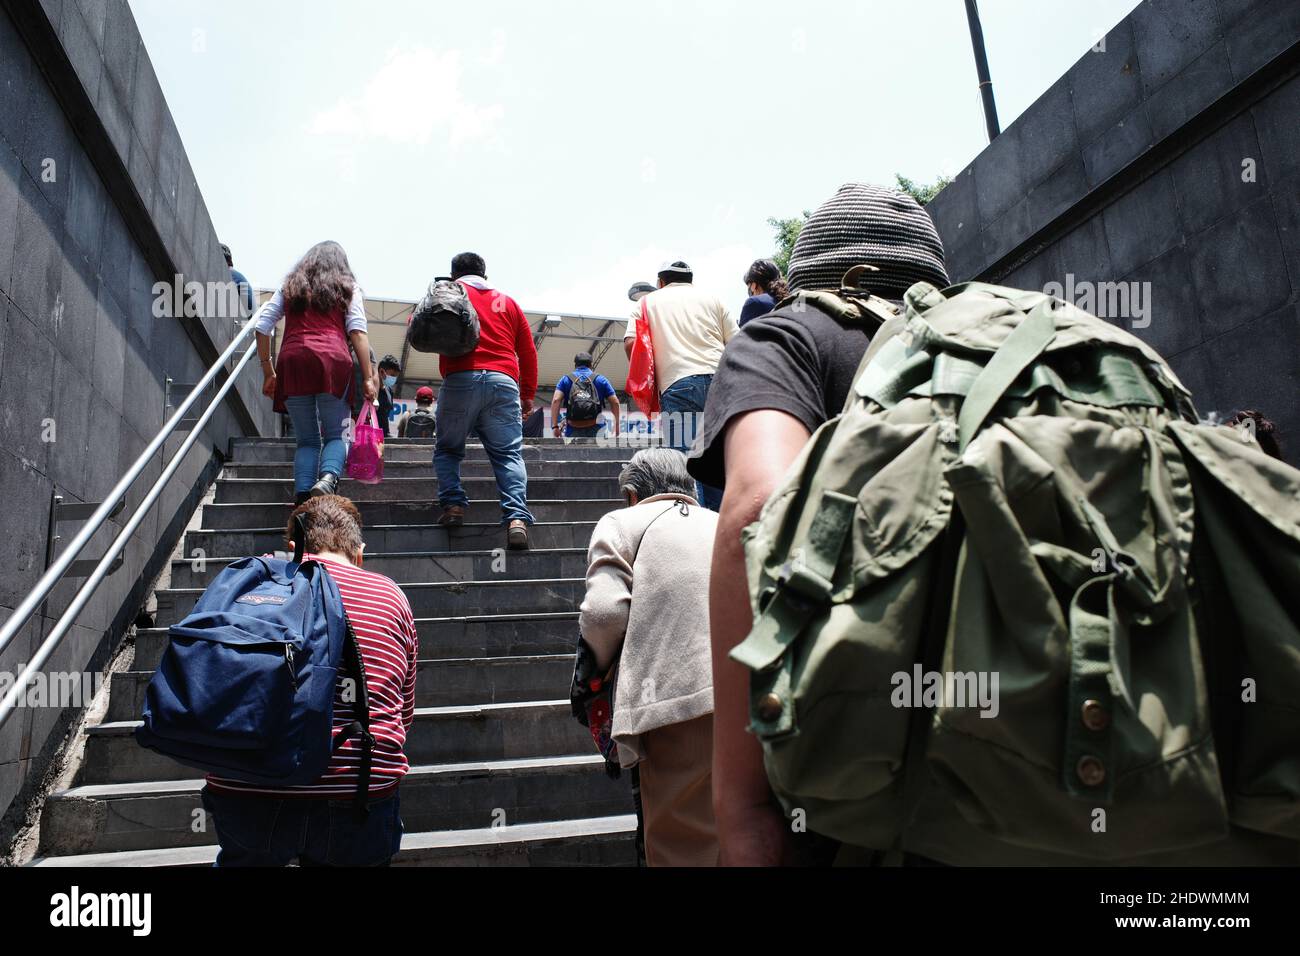 People coming out of an underground passage in Mexico City Stock Photo